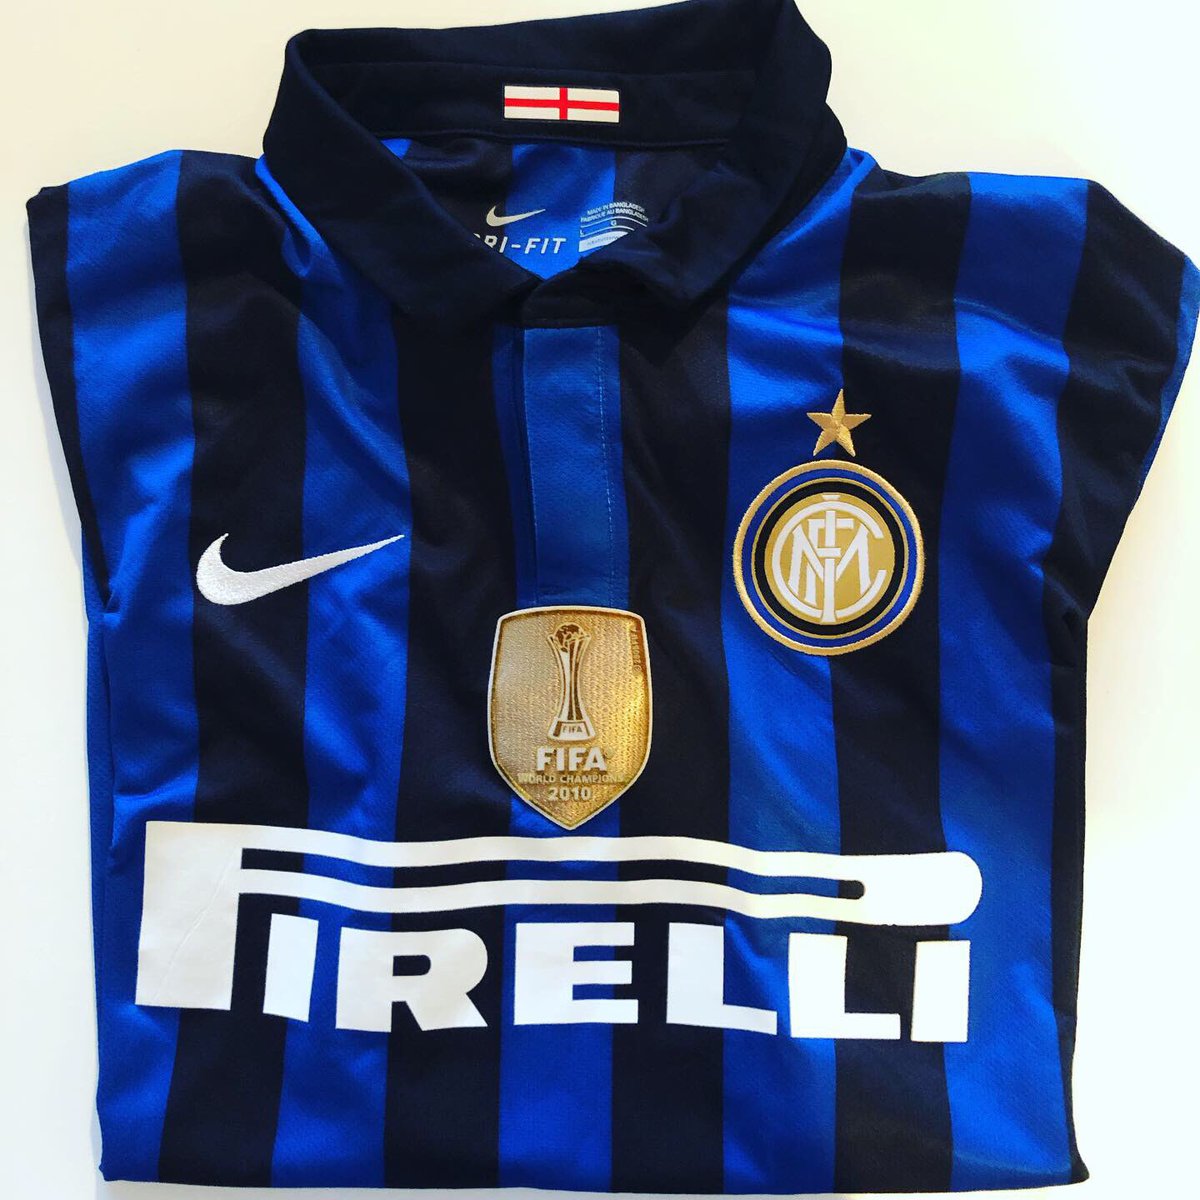 First post: @Inter, home jersey 2011-12Nike, officially licensed#8, GenoveseA graduation gift from my dad, an even bigger Interista than me. He ordered it himself online, as he went berserk with the extra badges (FIFA Club World Cup in front, UEFA Champions League on the arm)